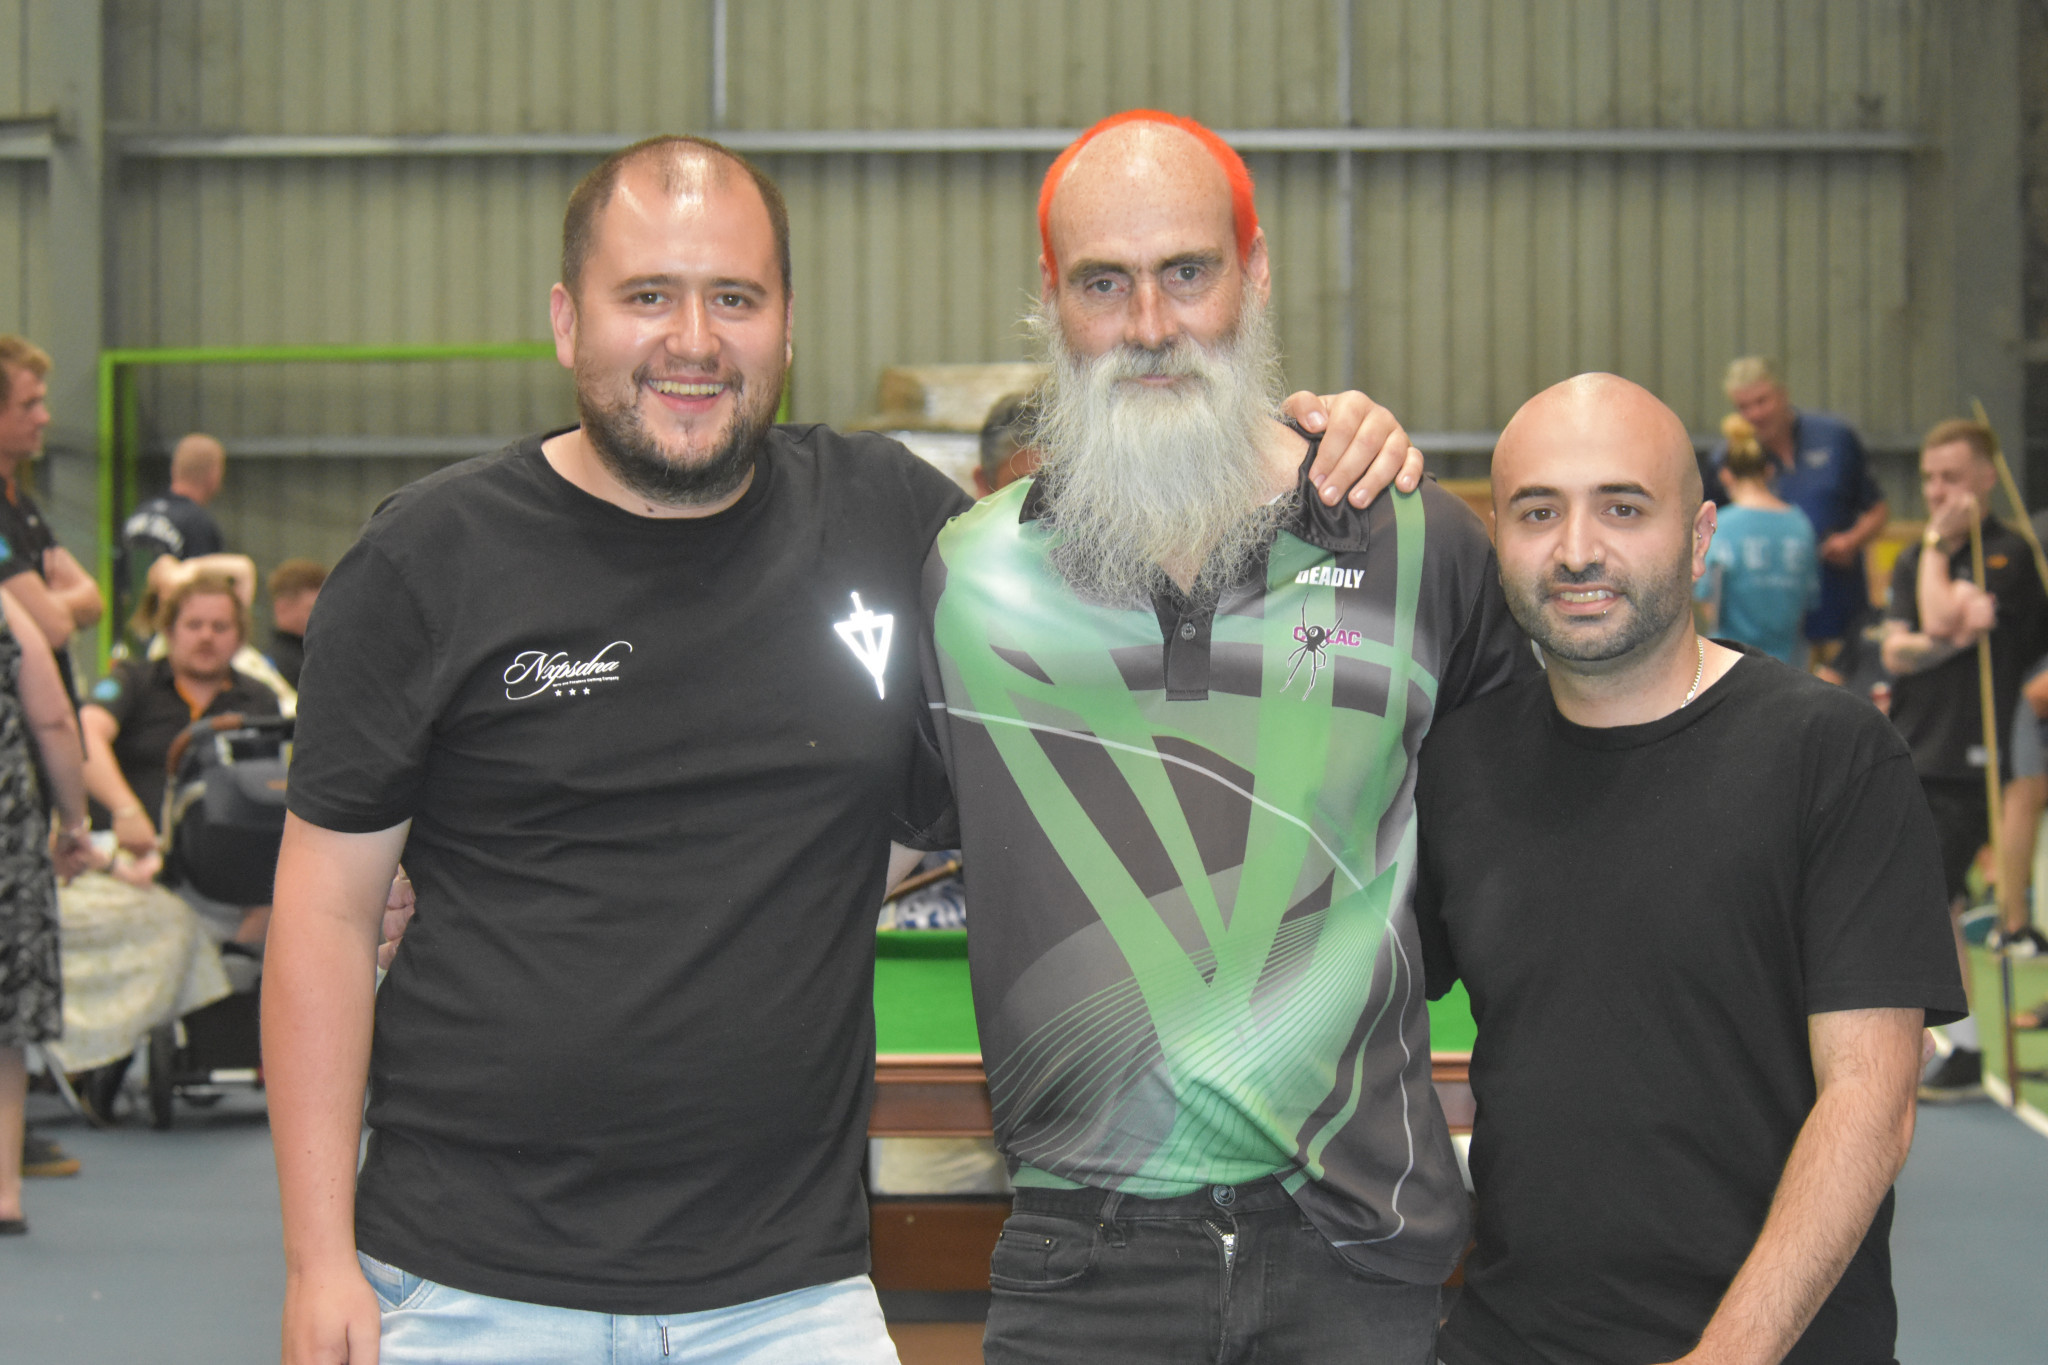 Organiser 'Deadly' with Jake McCartney (left) and Gus Di Giorgio (right)